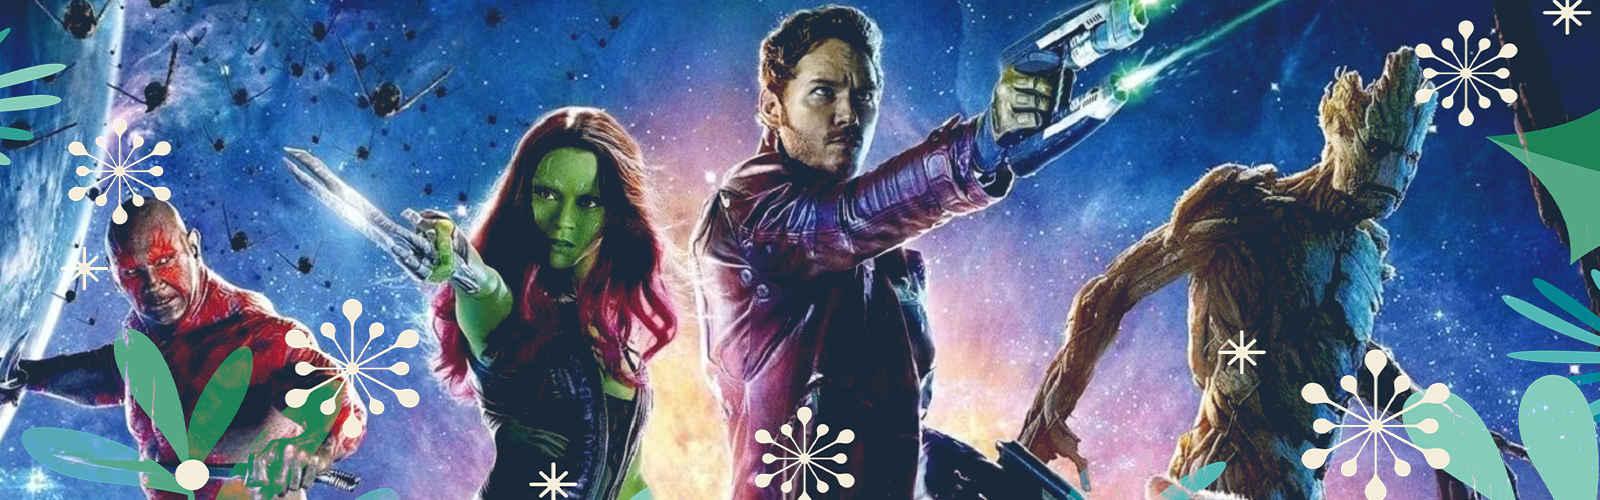 guardians of the galaxy holiday